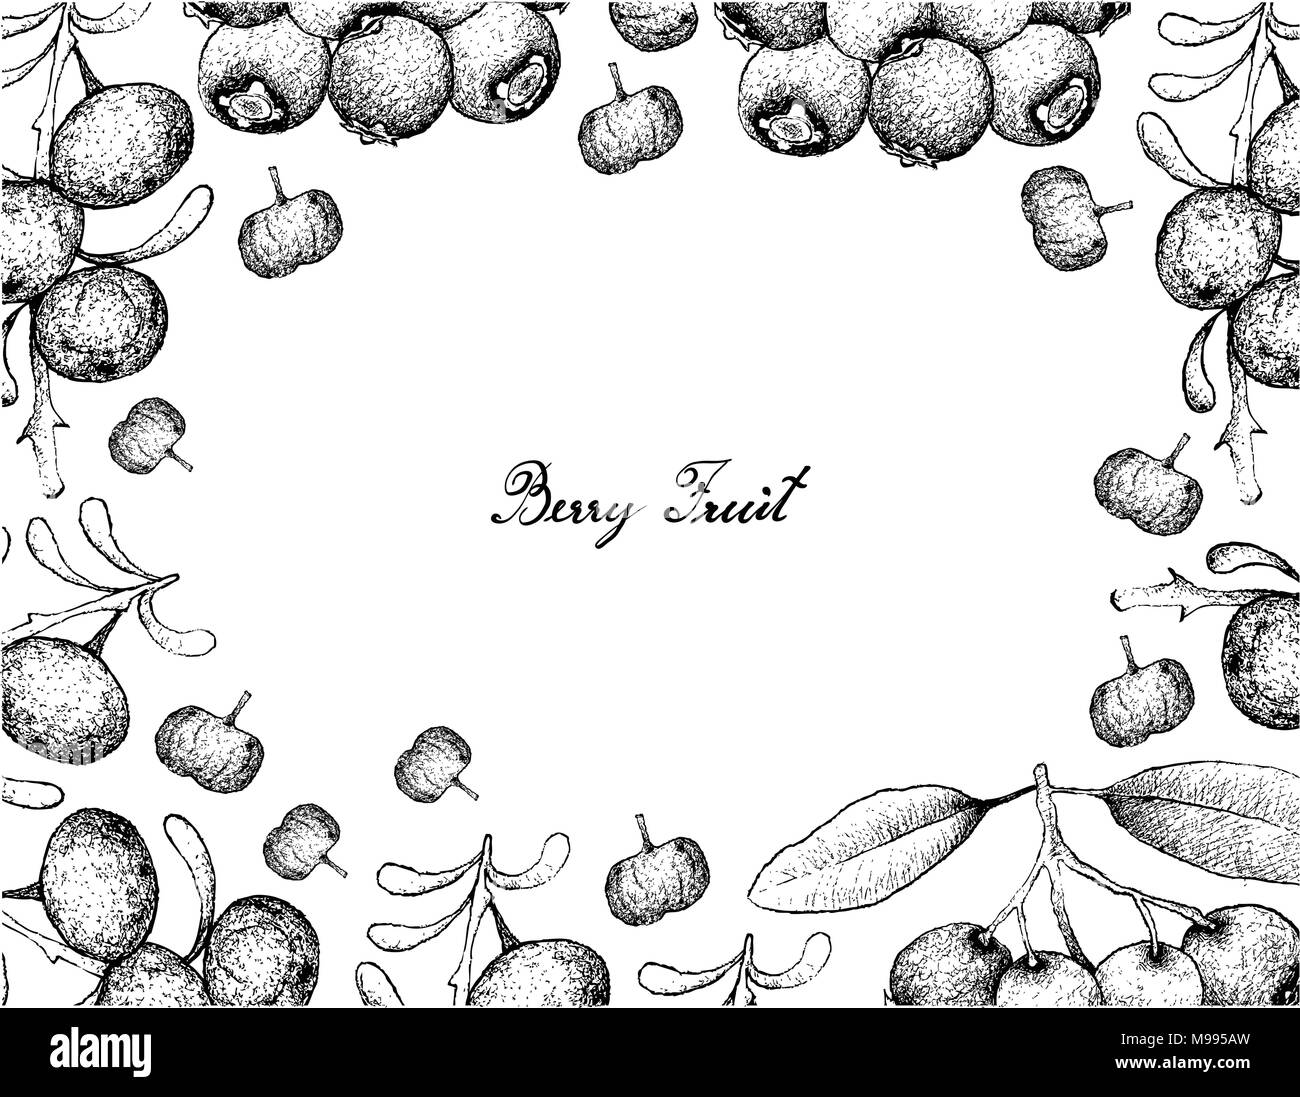 Berry Fruit, Illustration Frame of Hand Drawn Sketch of Blue Lilly Pilly or Syzygium Oleosum and Black Goji or Lycium Ruthenicum Fruits Isolated on Wh Stock Vector